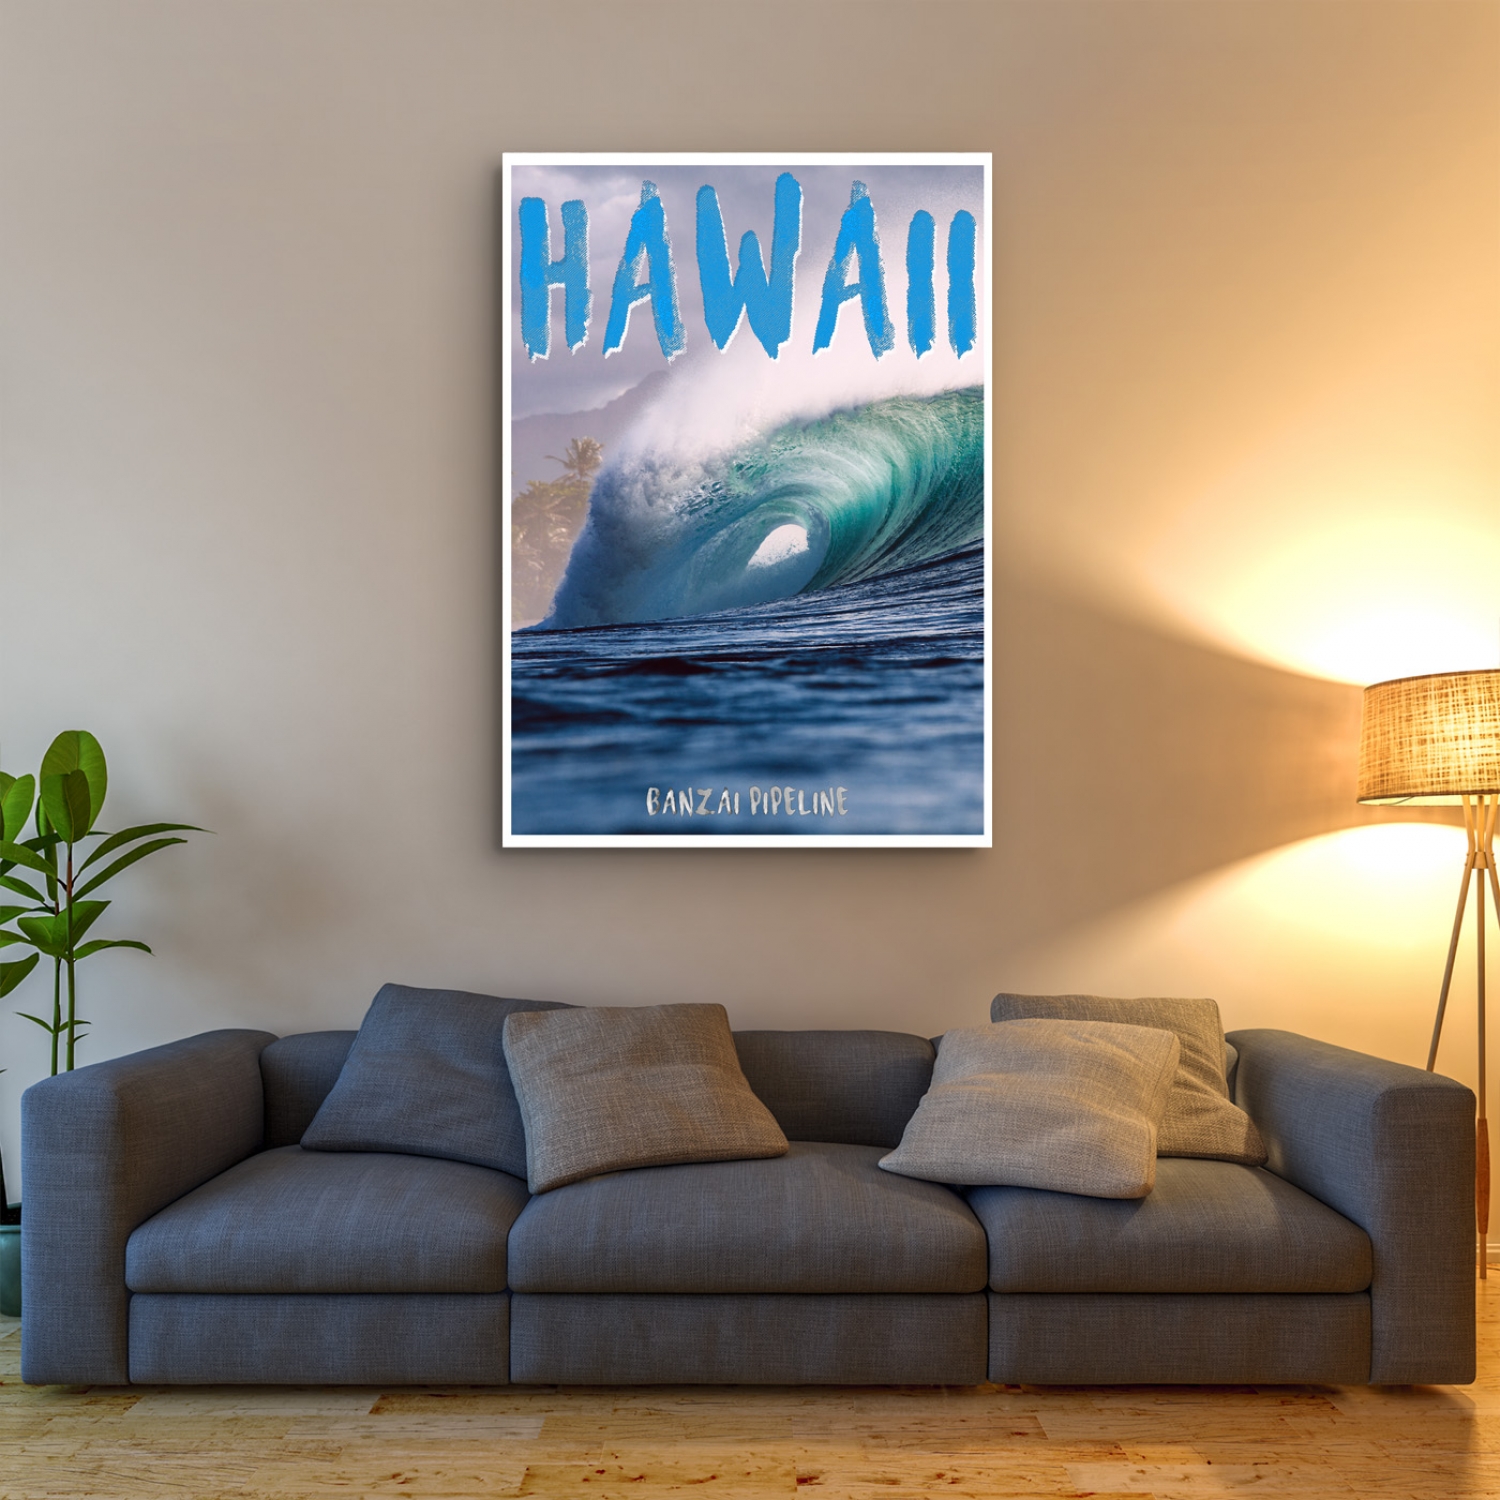 Hawaii - Banzai Pipeline | Photographic Surf Poster | Just Posters